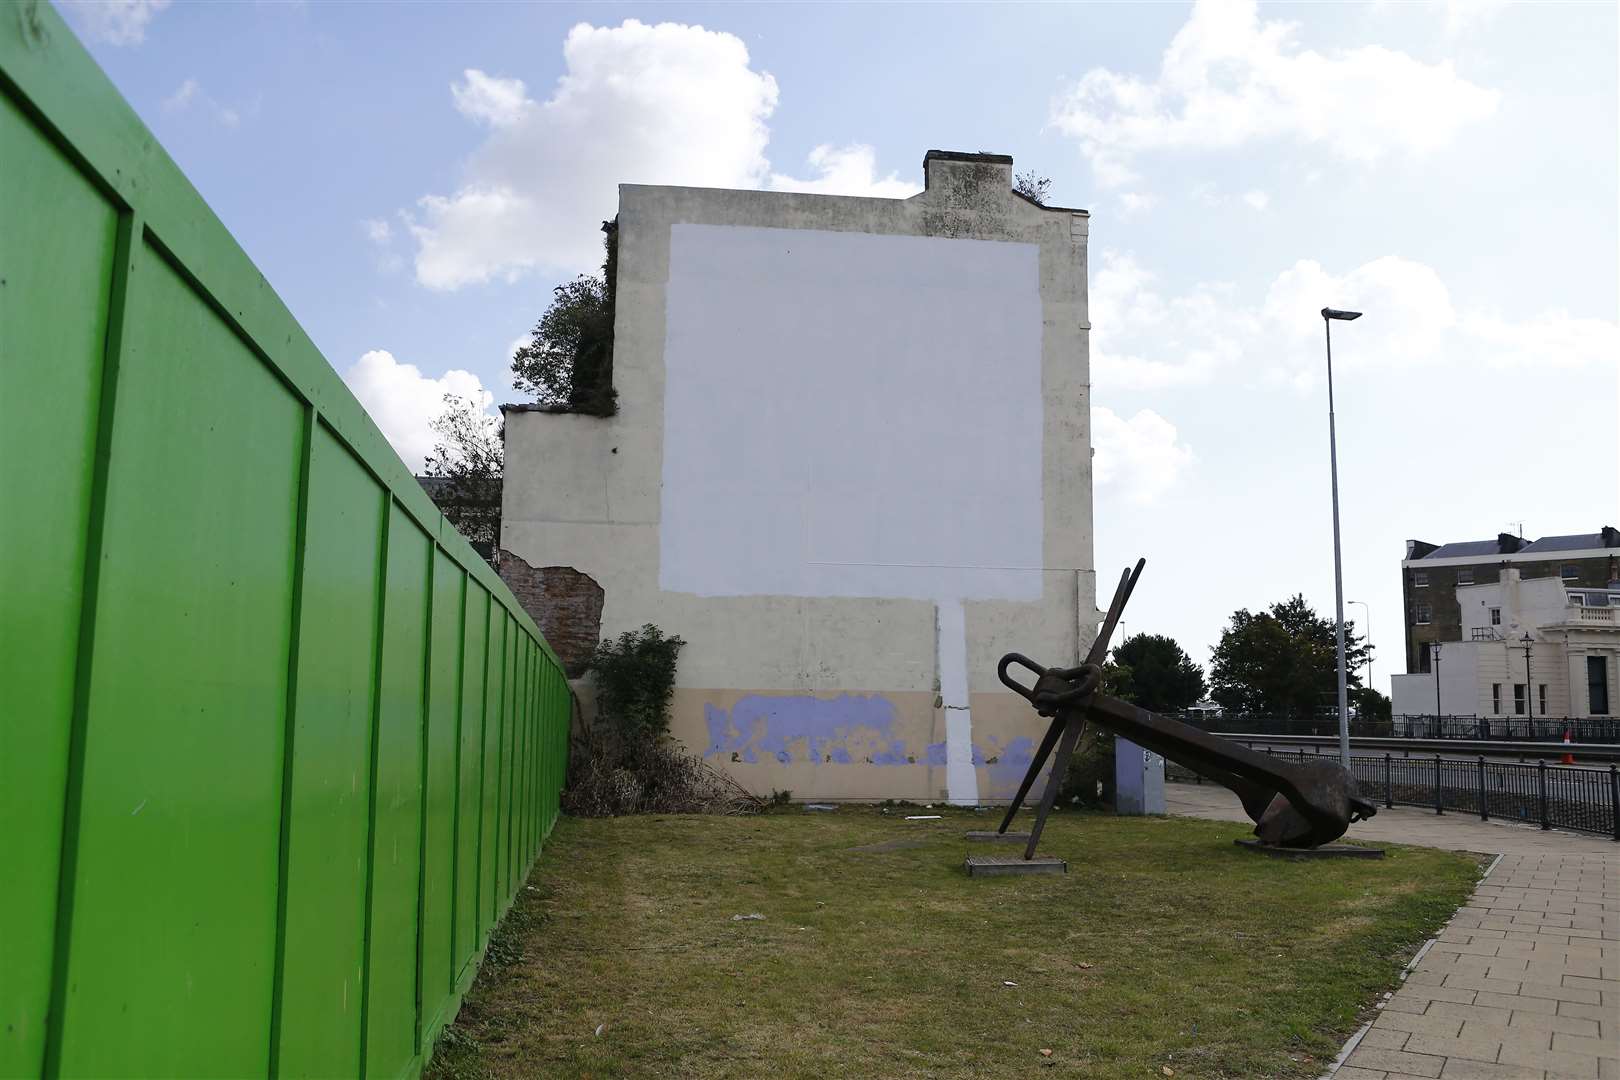 The Banksy mural was later covered up - but there are calls to try and preserve it. Picture: Matt Bristow